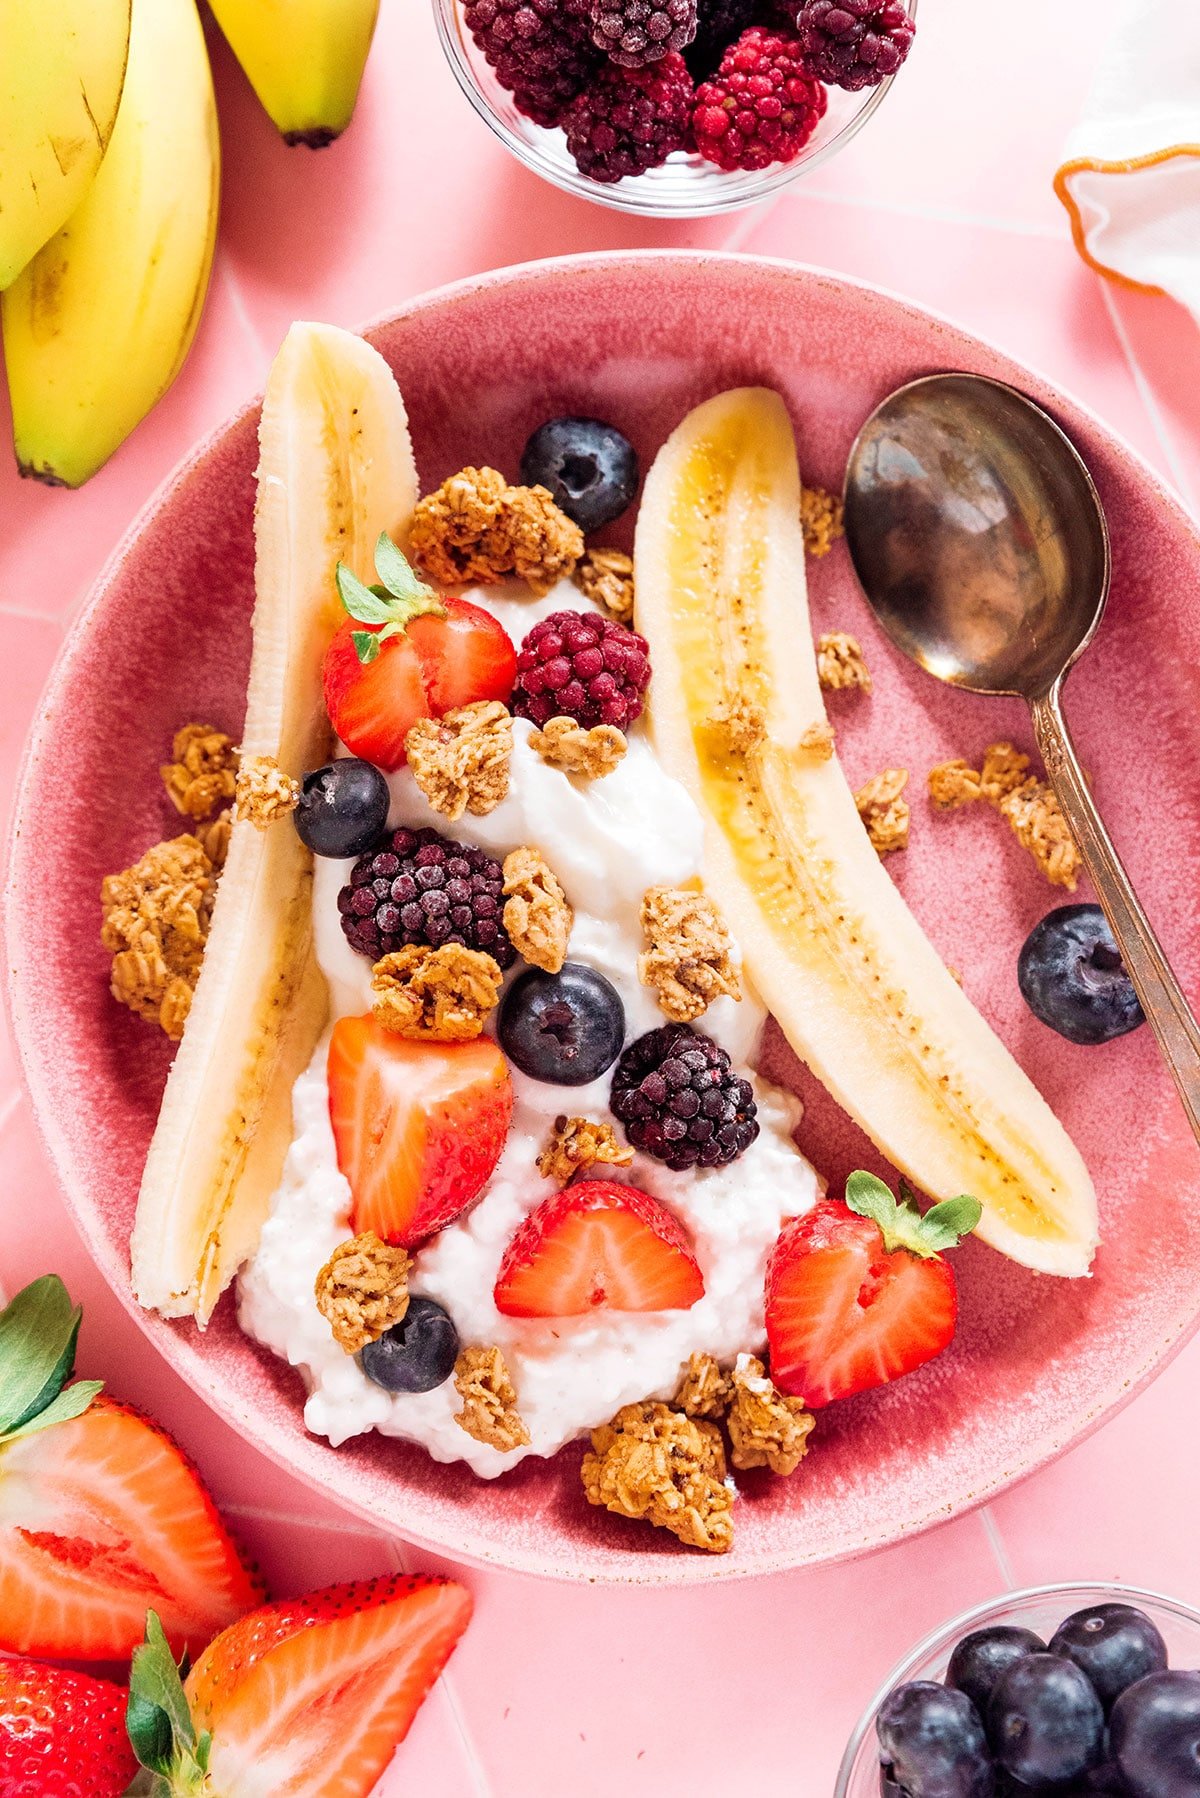 A split open banana with cottage cheese and yogurt topped with berries and granola.